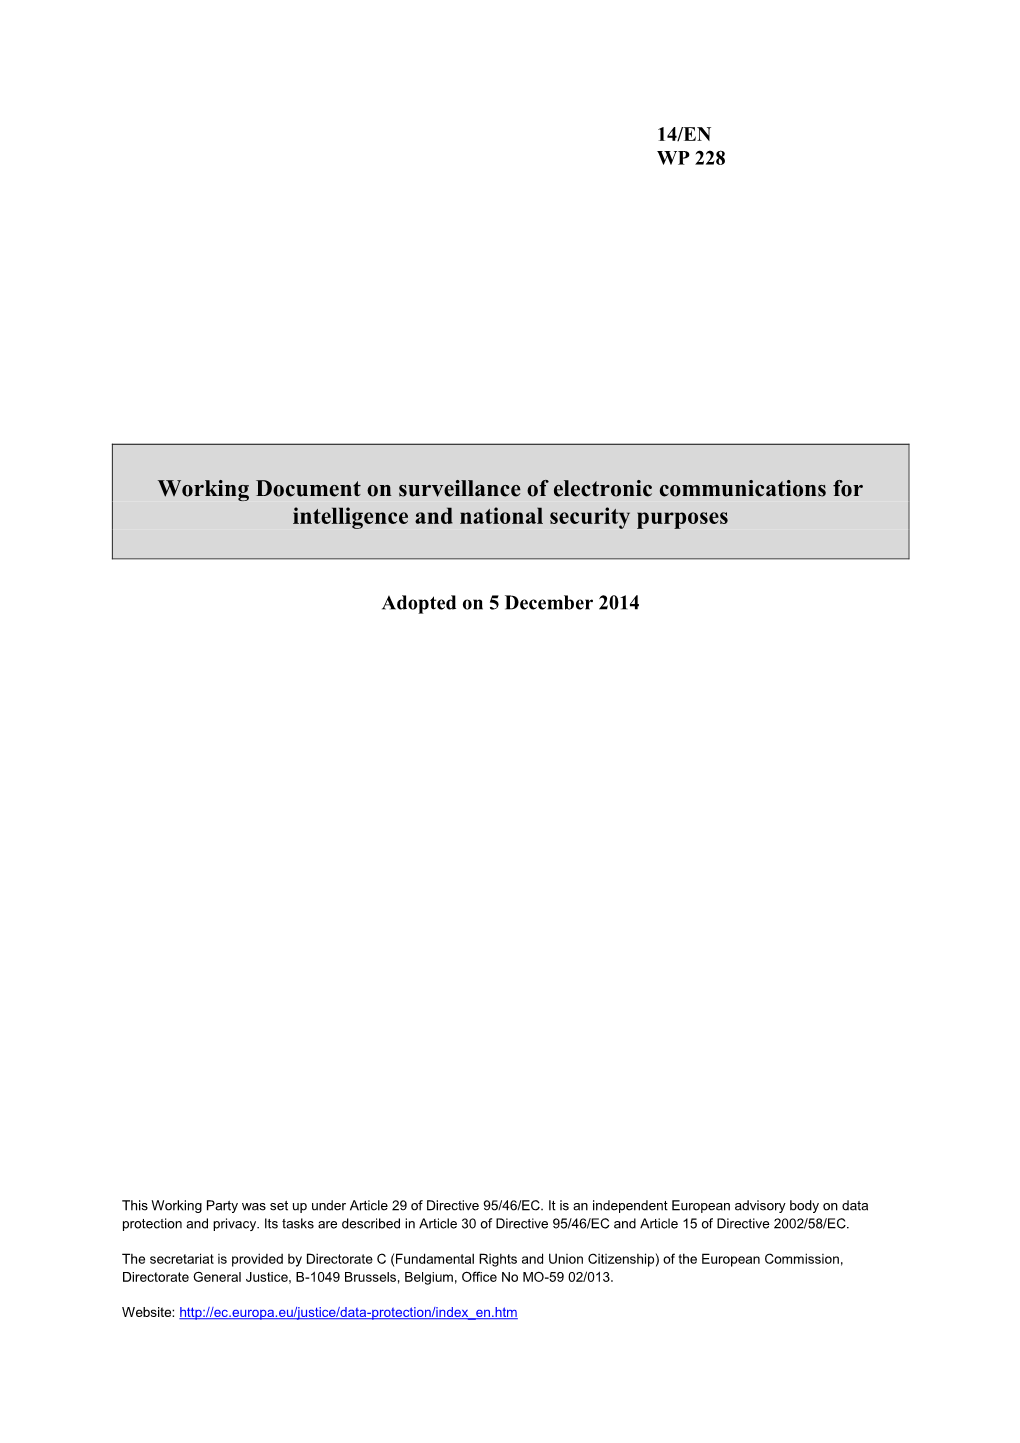 Working Document on Surveillance of Electronic Communications for Intelligence and National Security Purposes